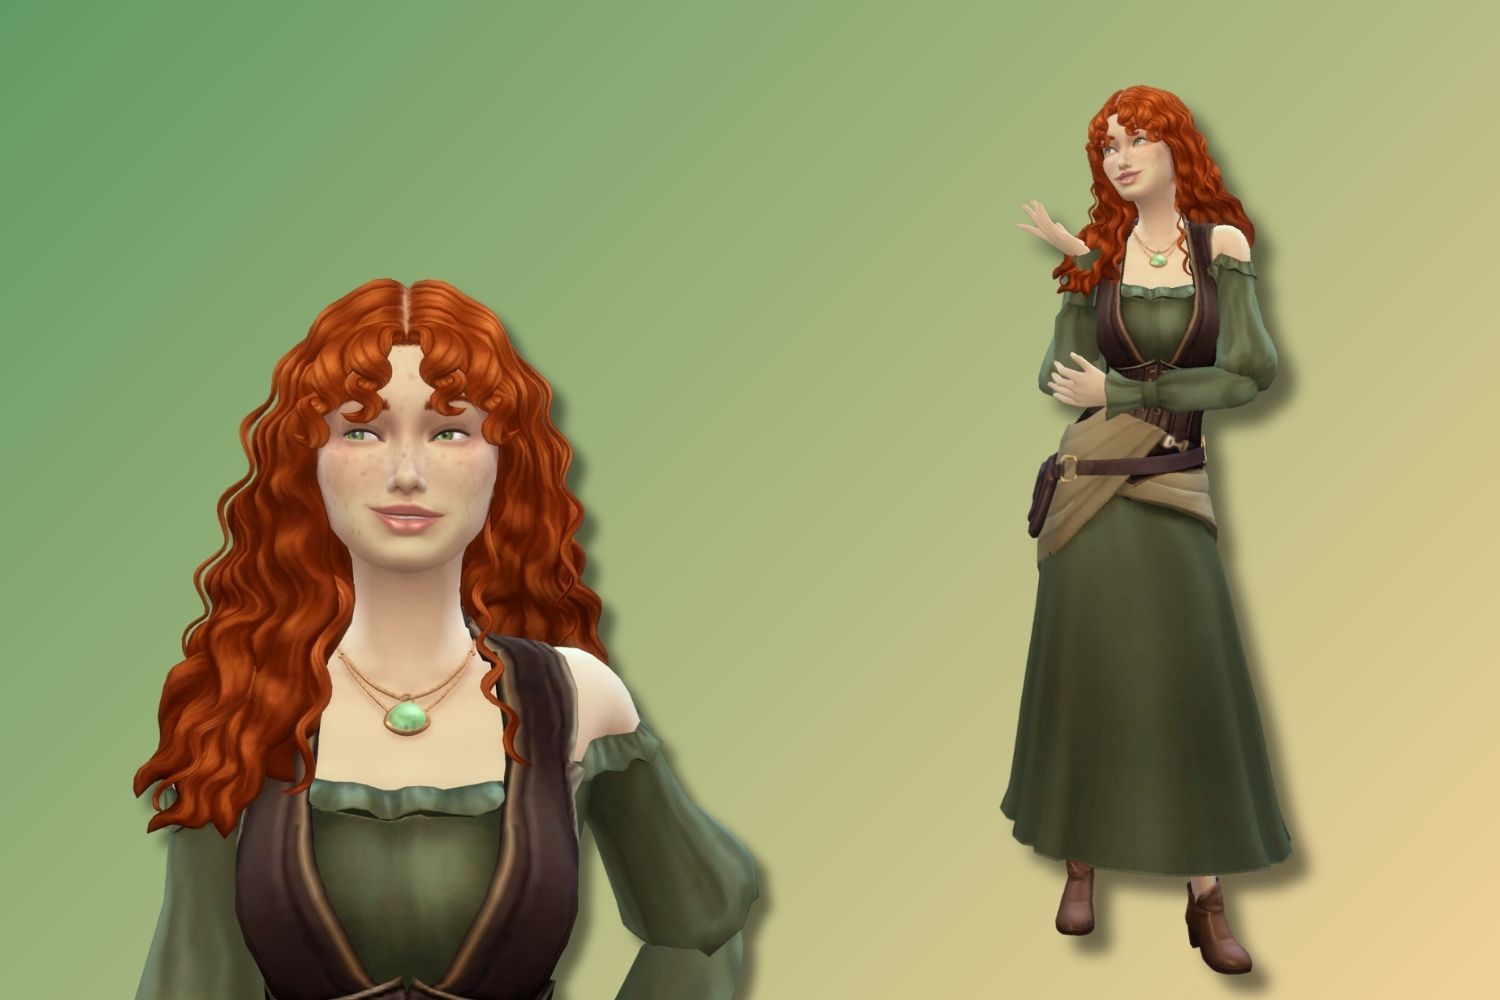 A Sim that looks like Merida from Disney's Brave stands against a green and yellow background.